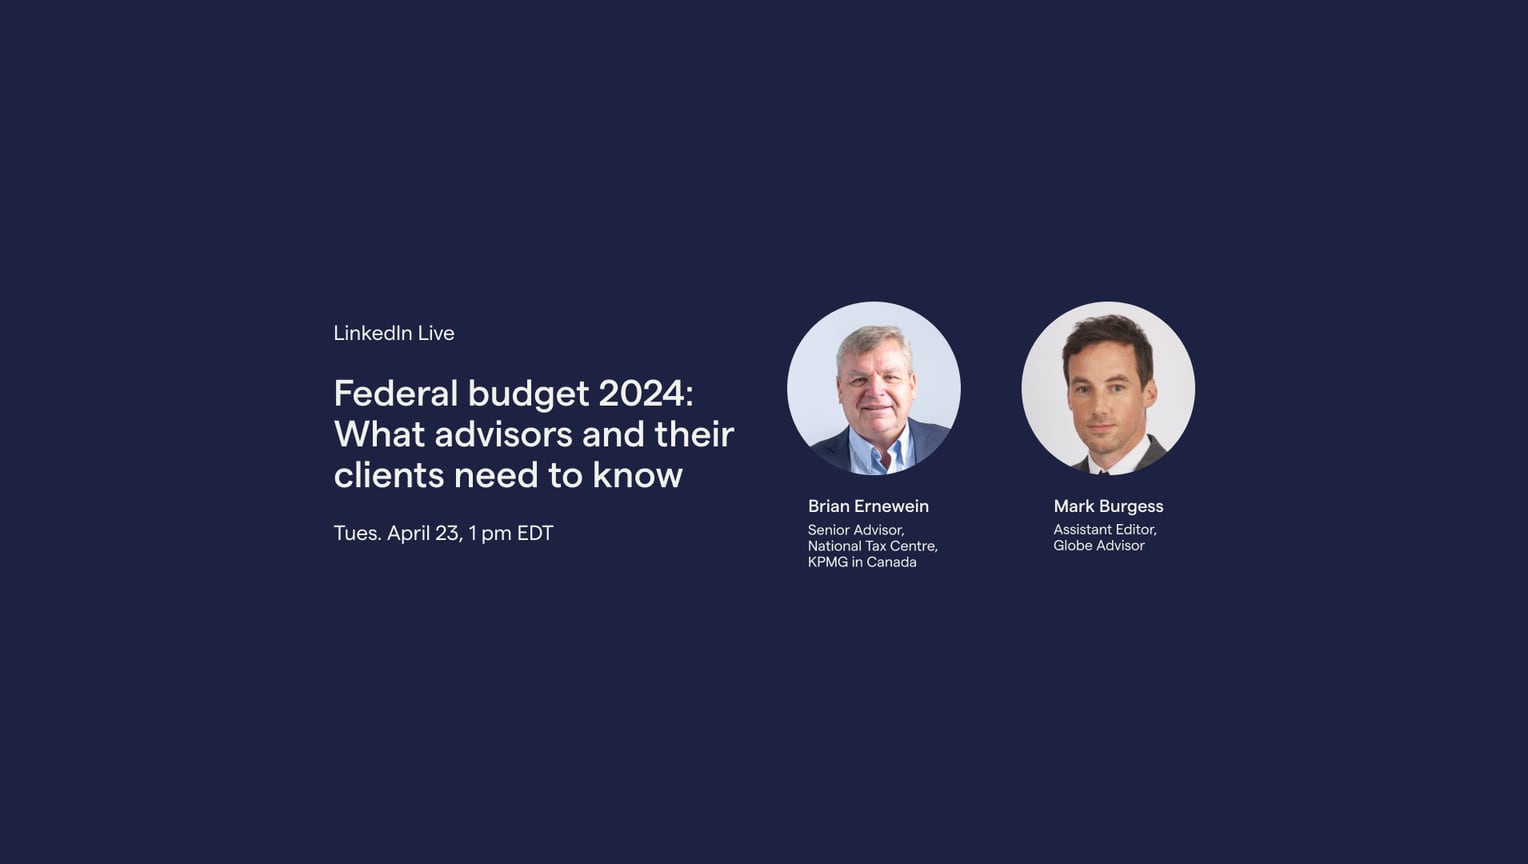 Video: Federal budget 2024: What advisors and their clients need to know [Video]